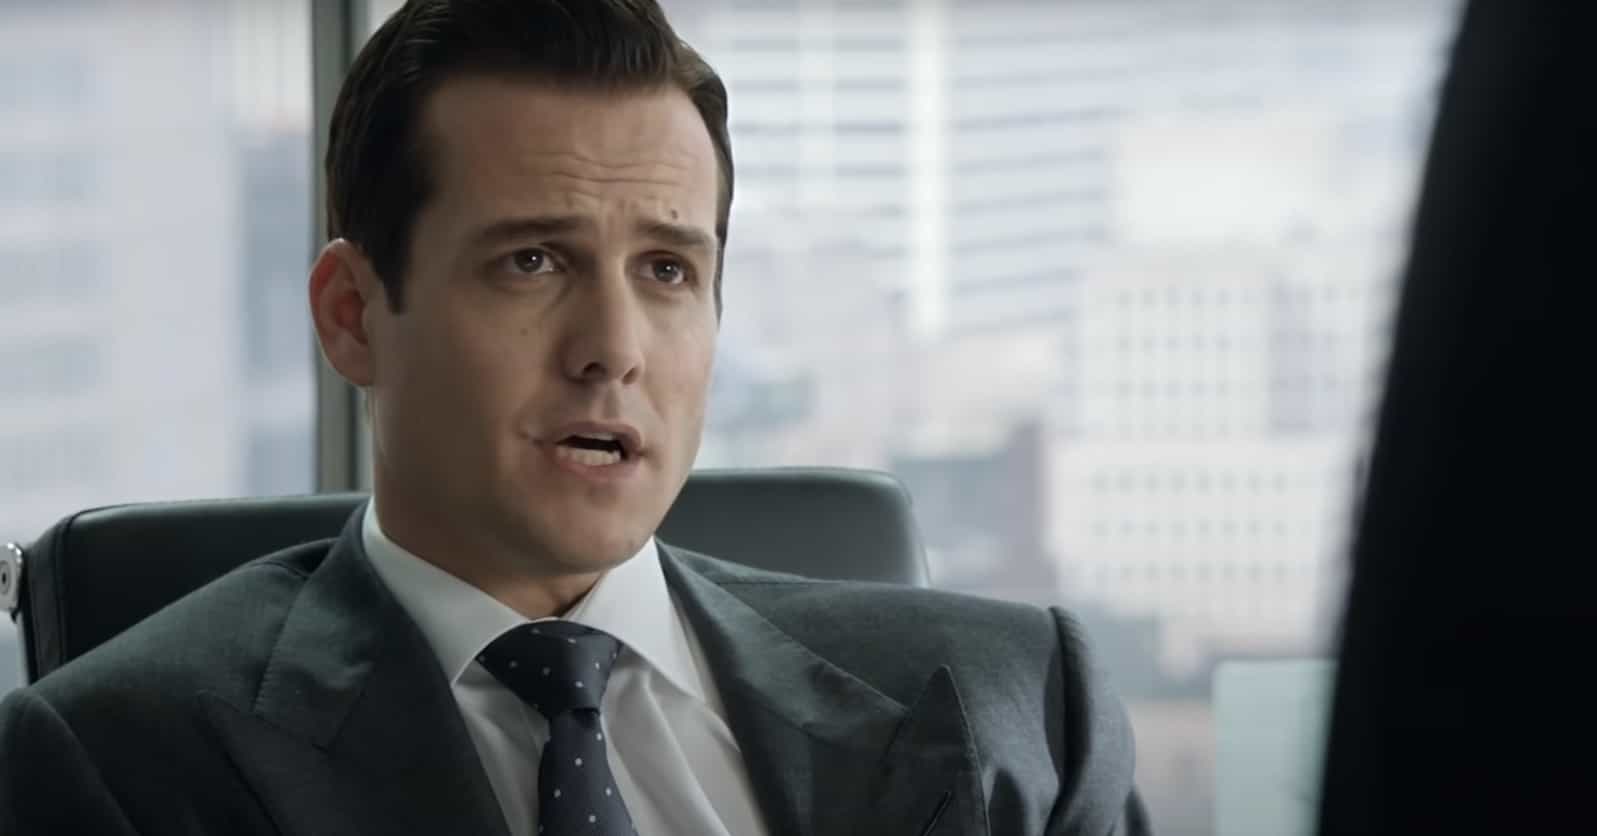 17 Harvey Specter 'Suits' Quotes That Could Charm A Jury